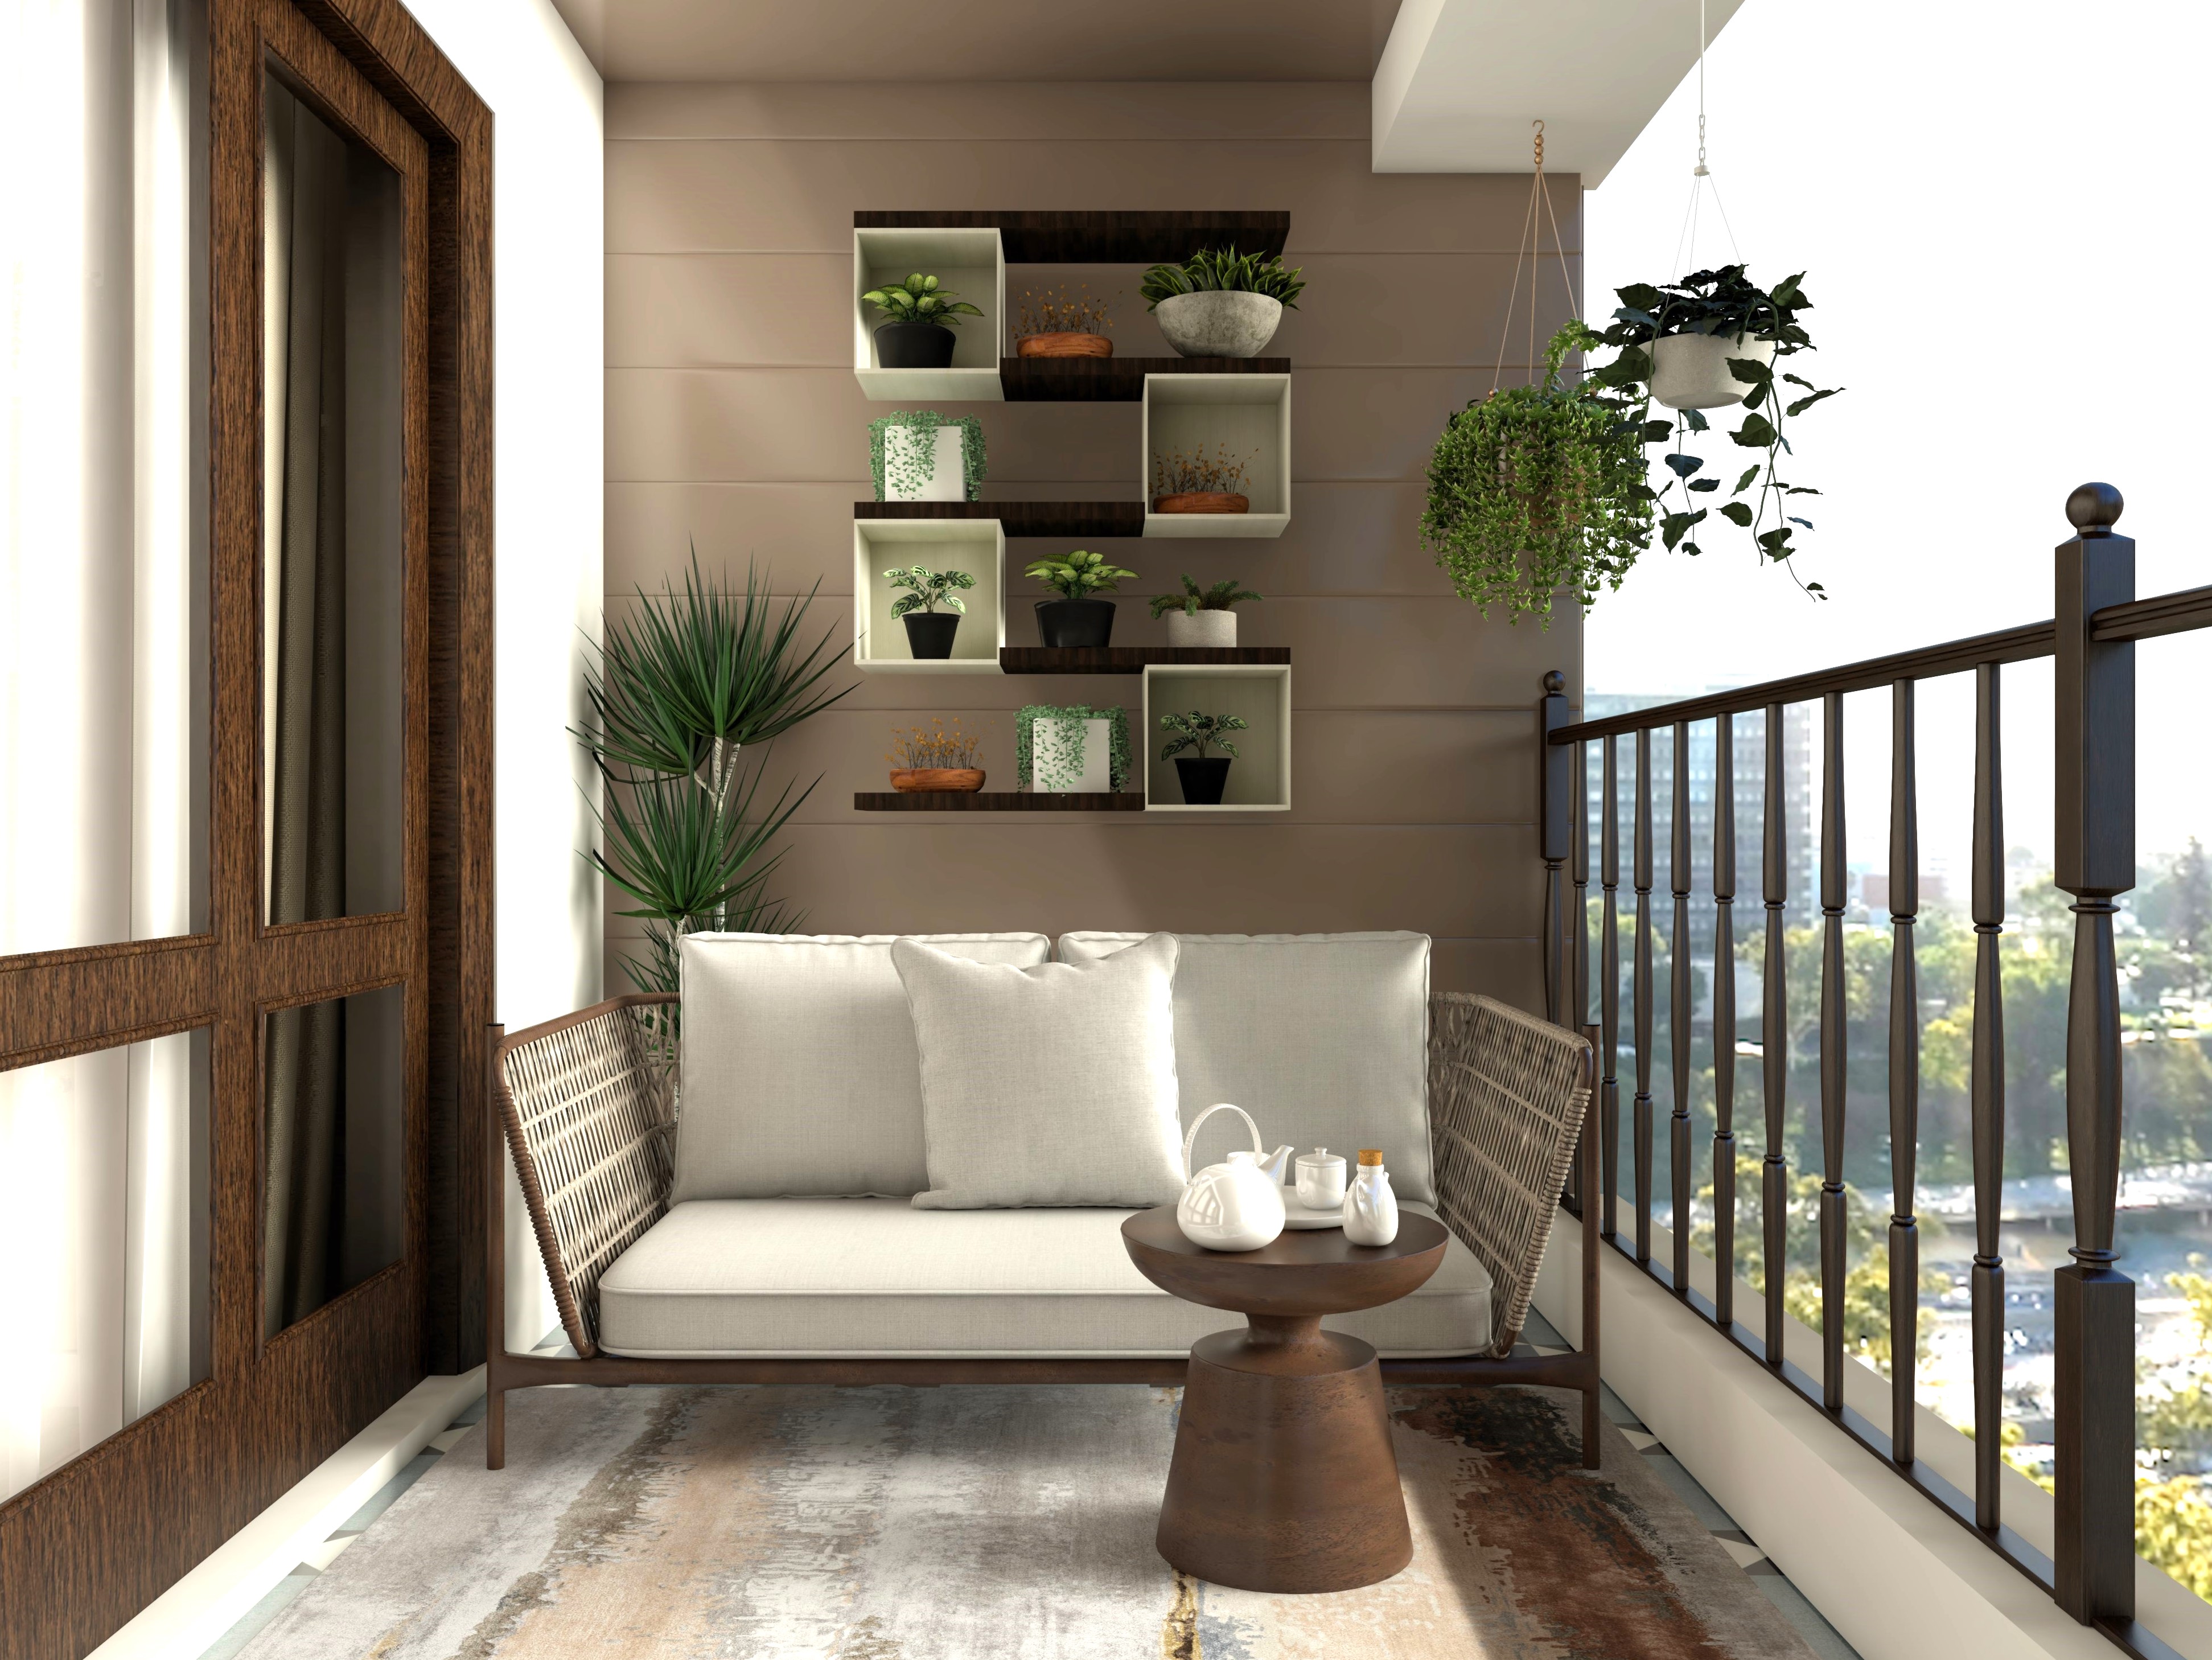 Balcony design with wooden wall shelves and white sofa-Beautiful Homes